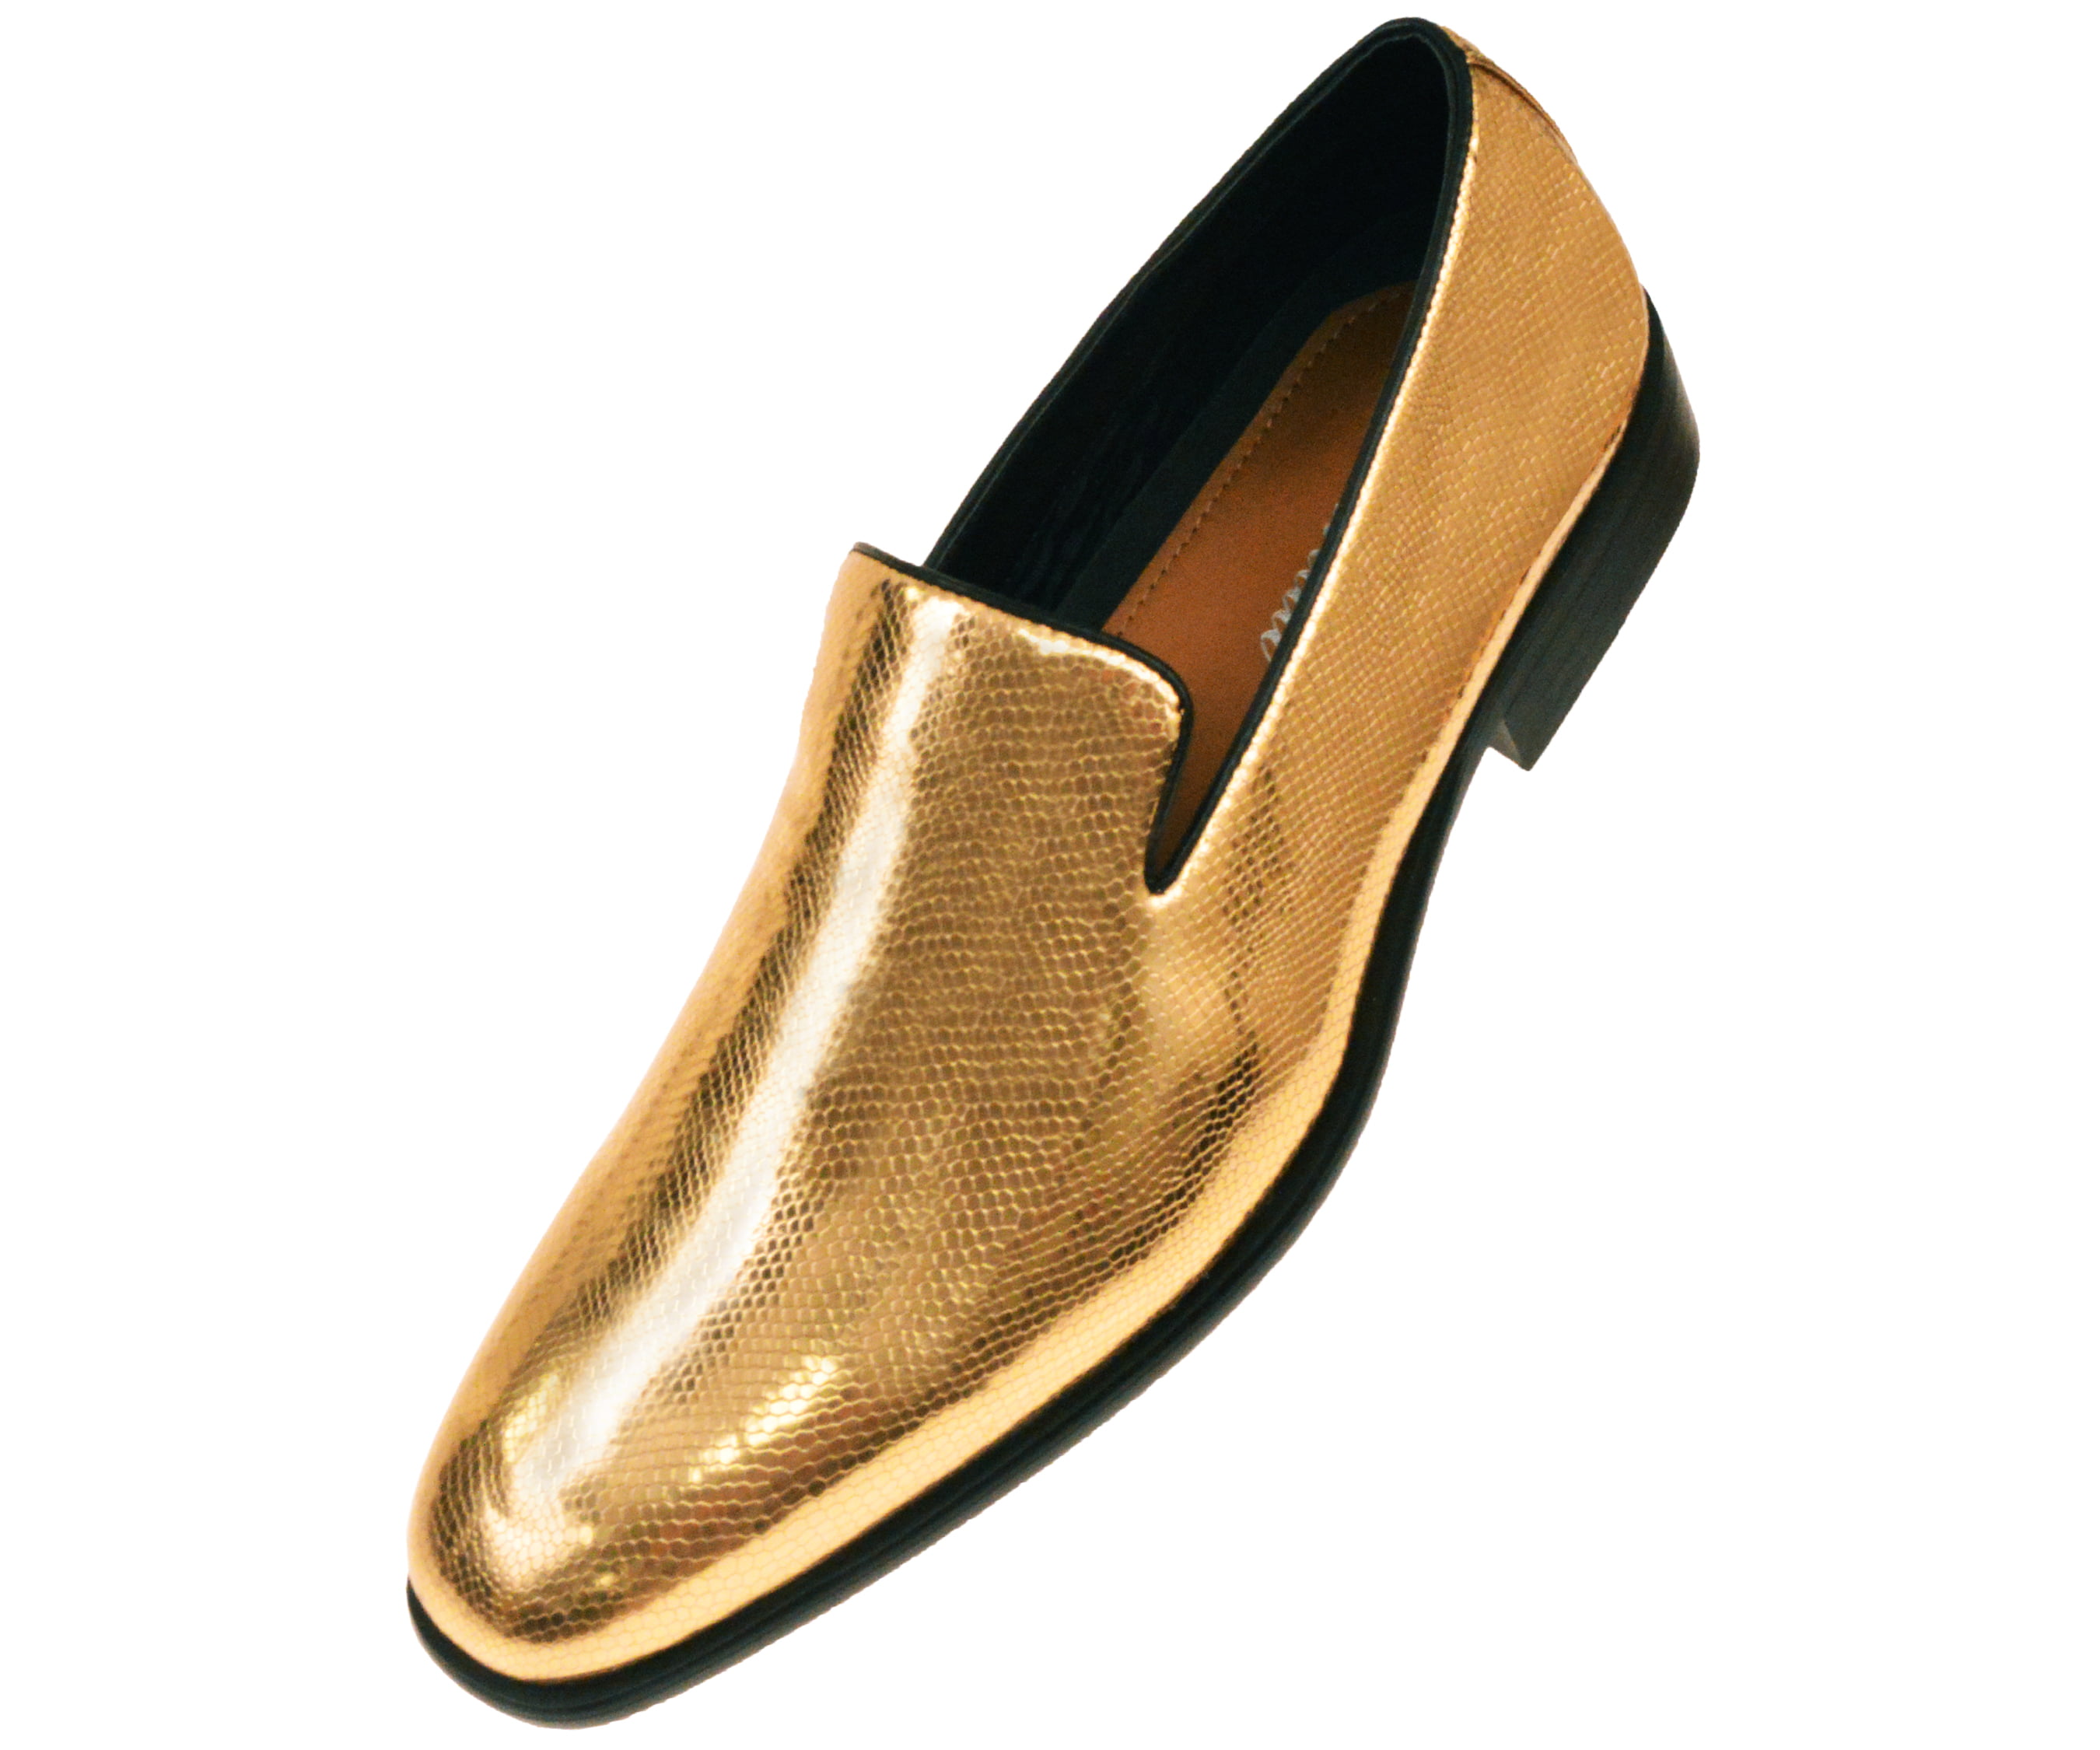 white and gold men dress shoes